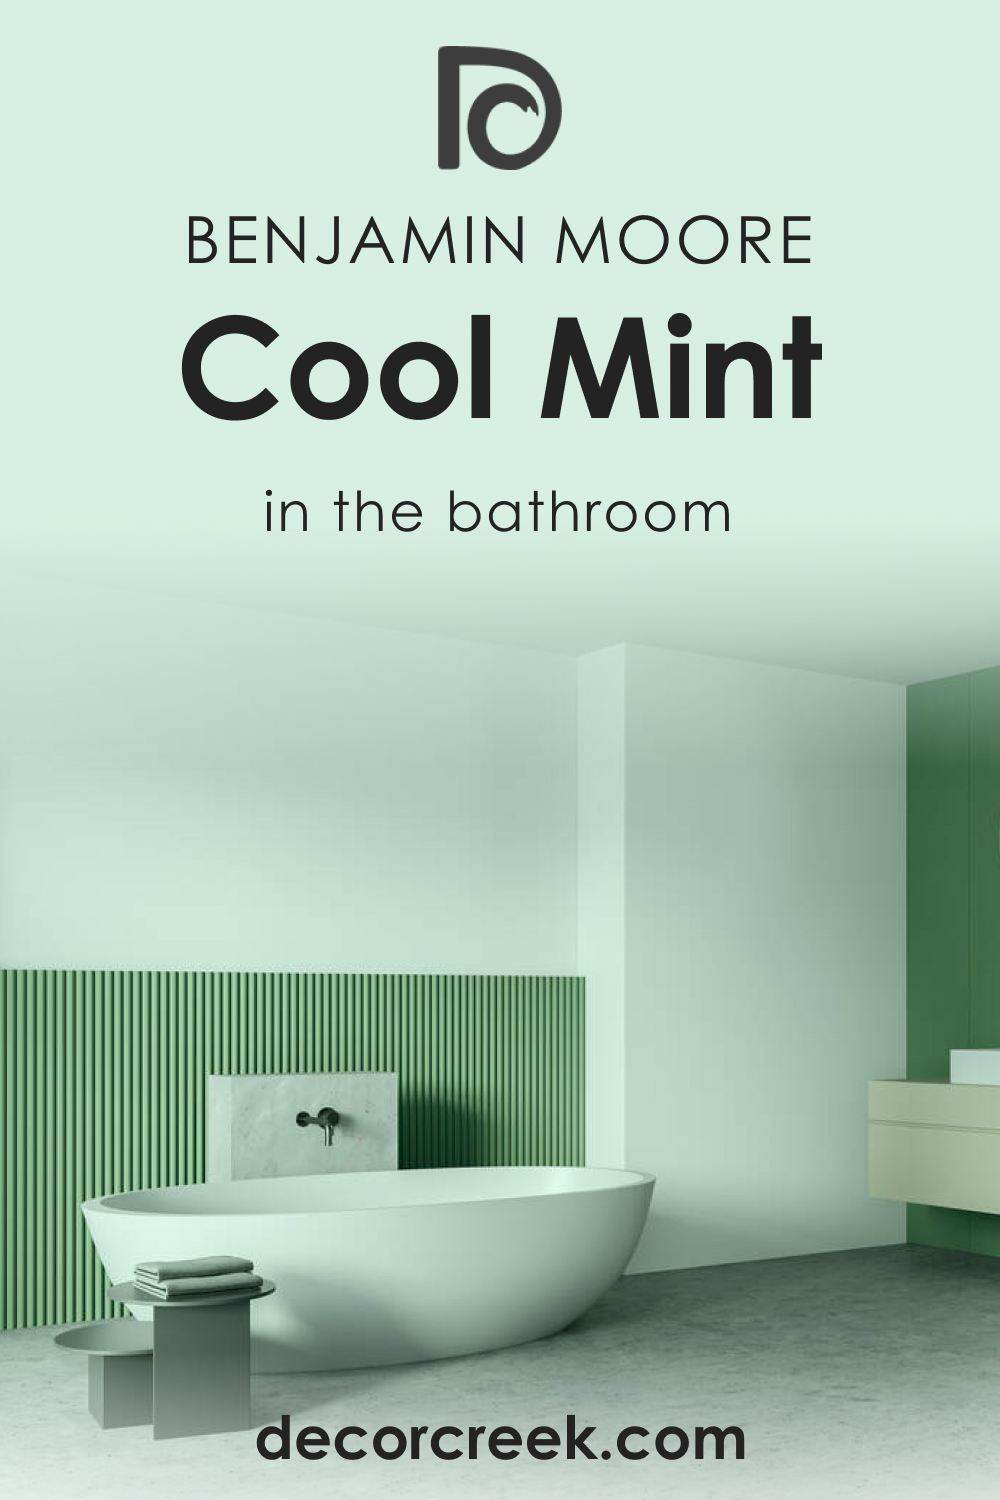 How to Use Cool Mint 582 in the Bathroom?